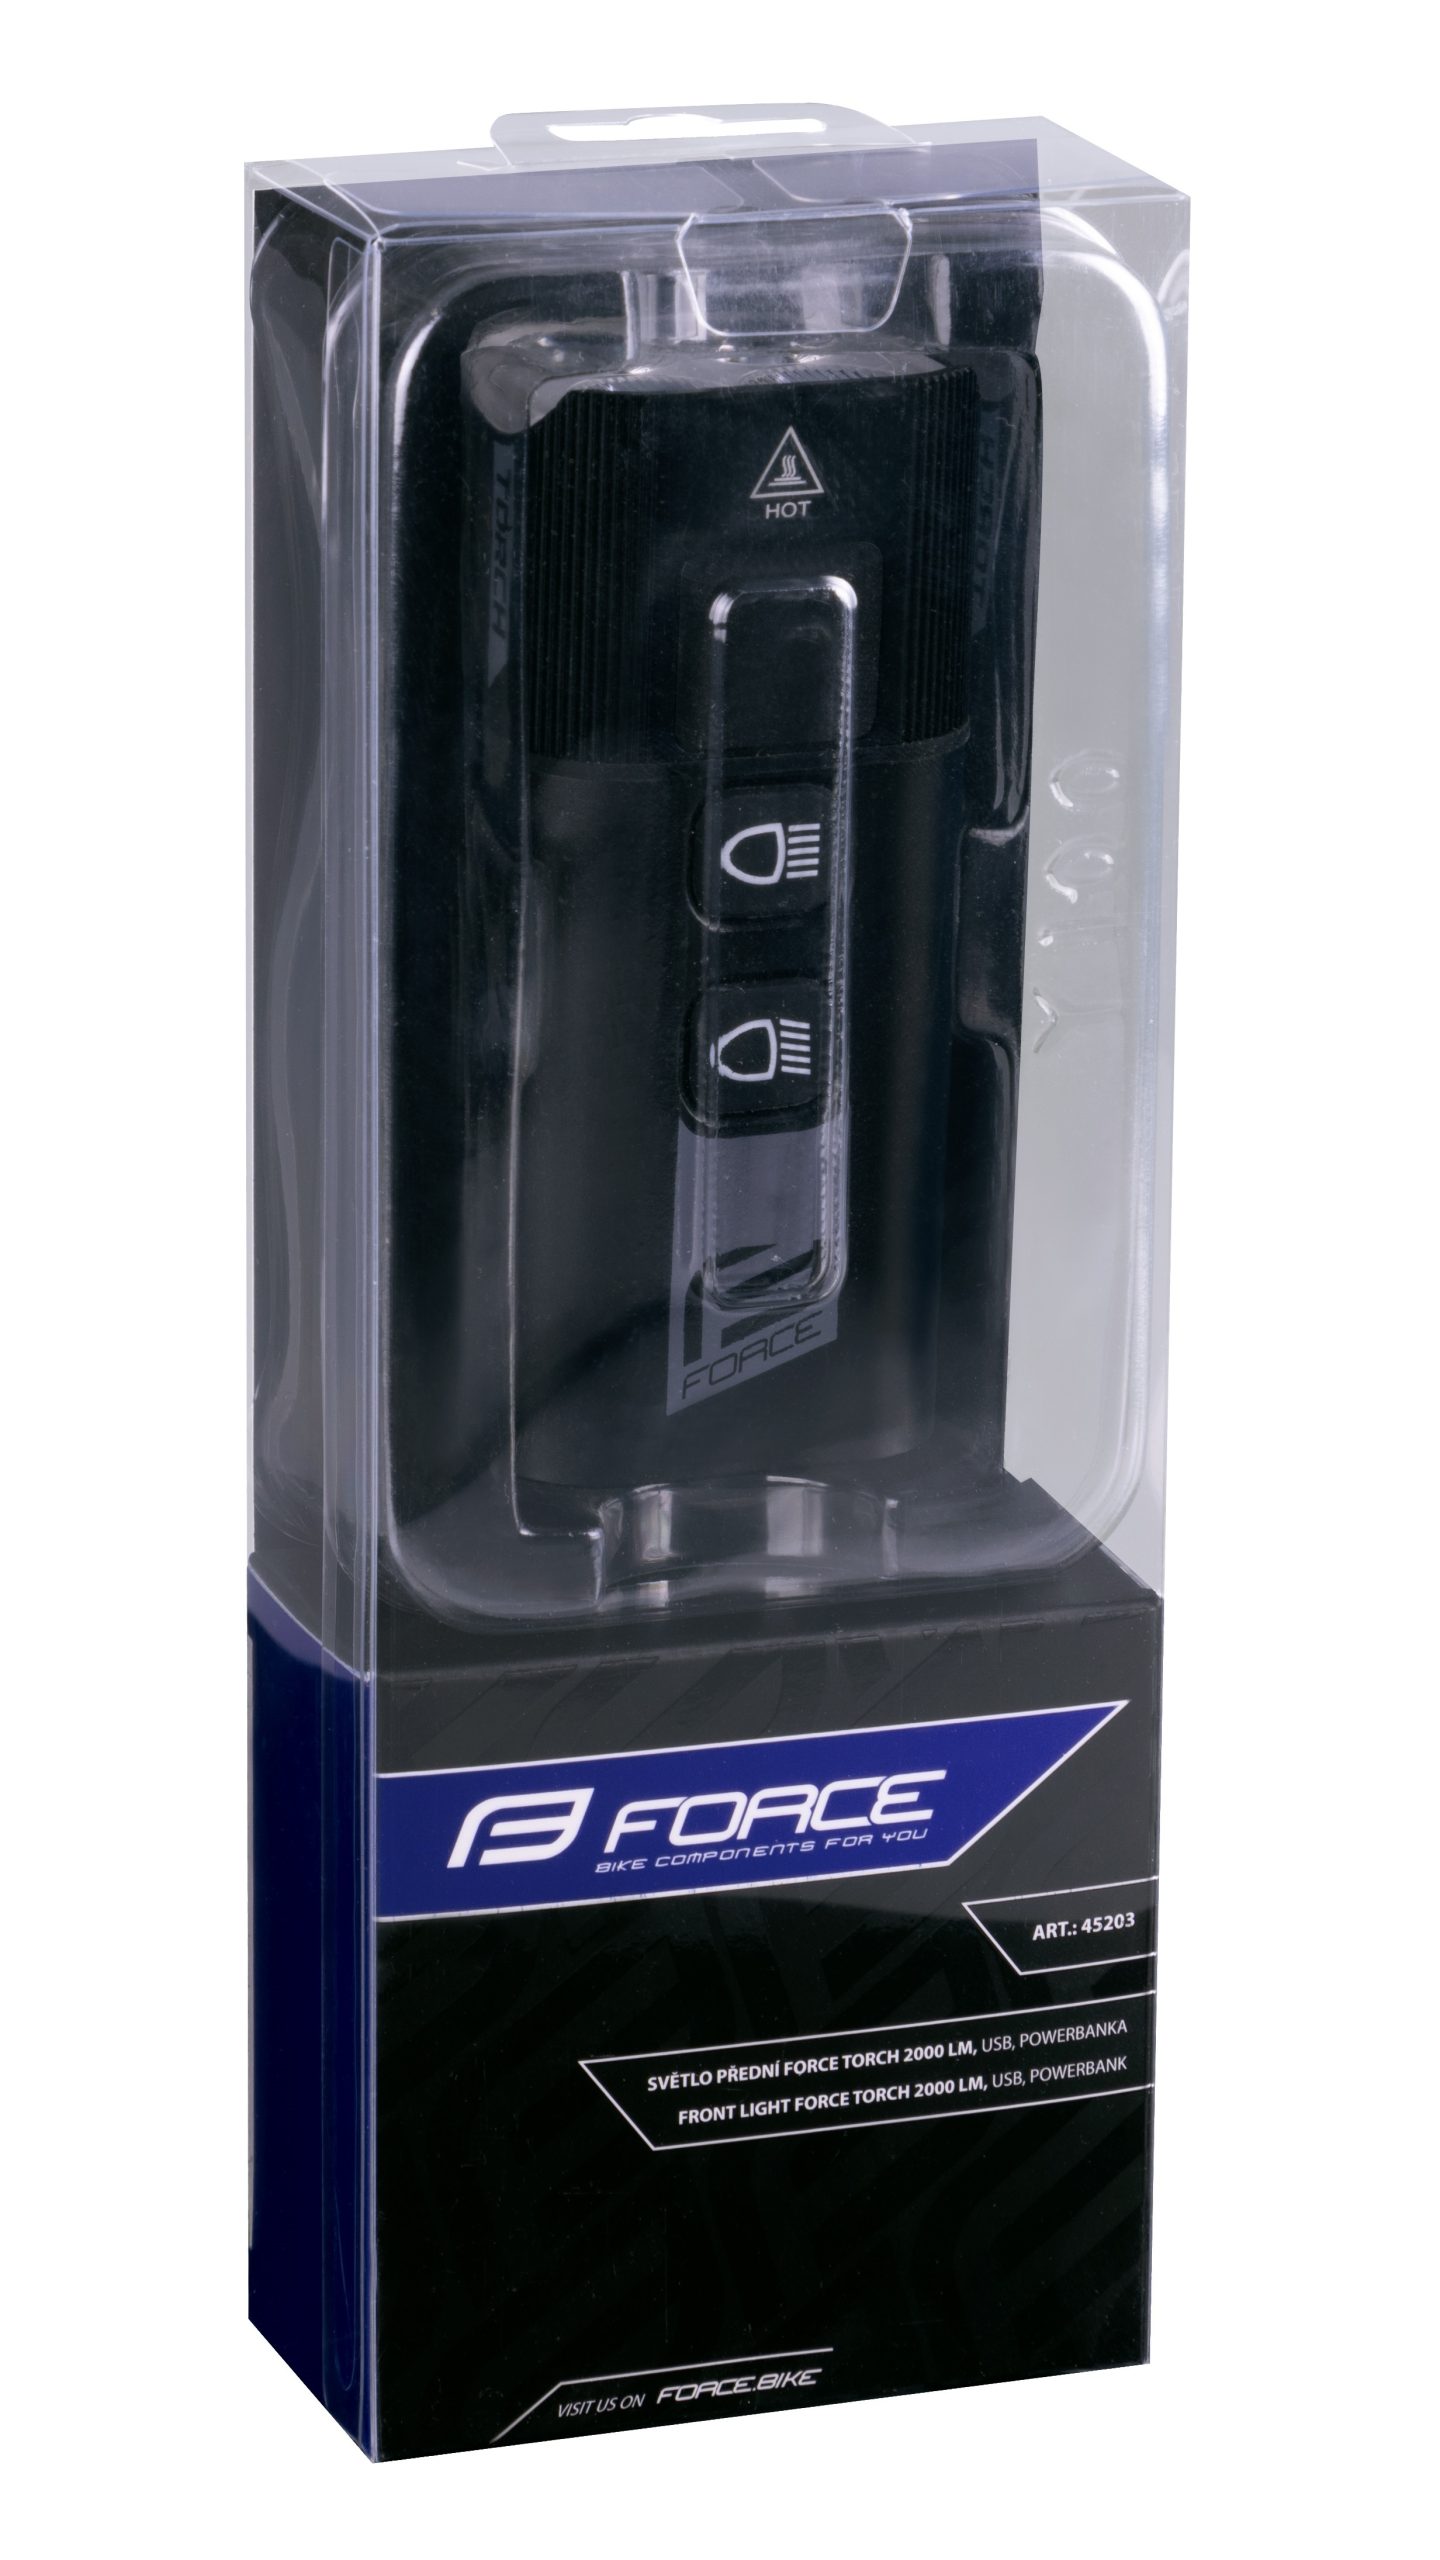 front-light-force-torch-2000lm-usb-powerbank-img-45203_bal-fd-11